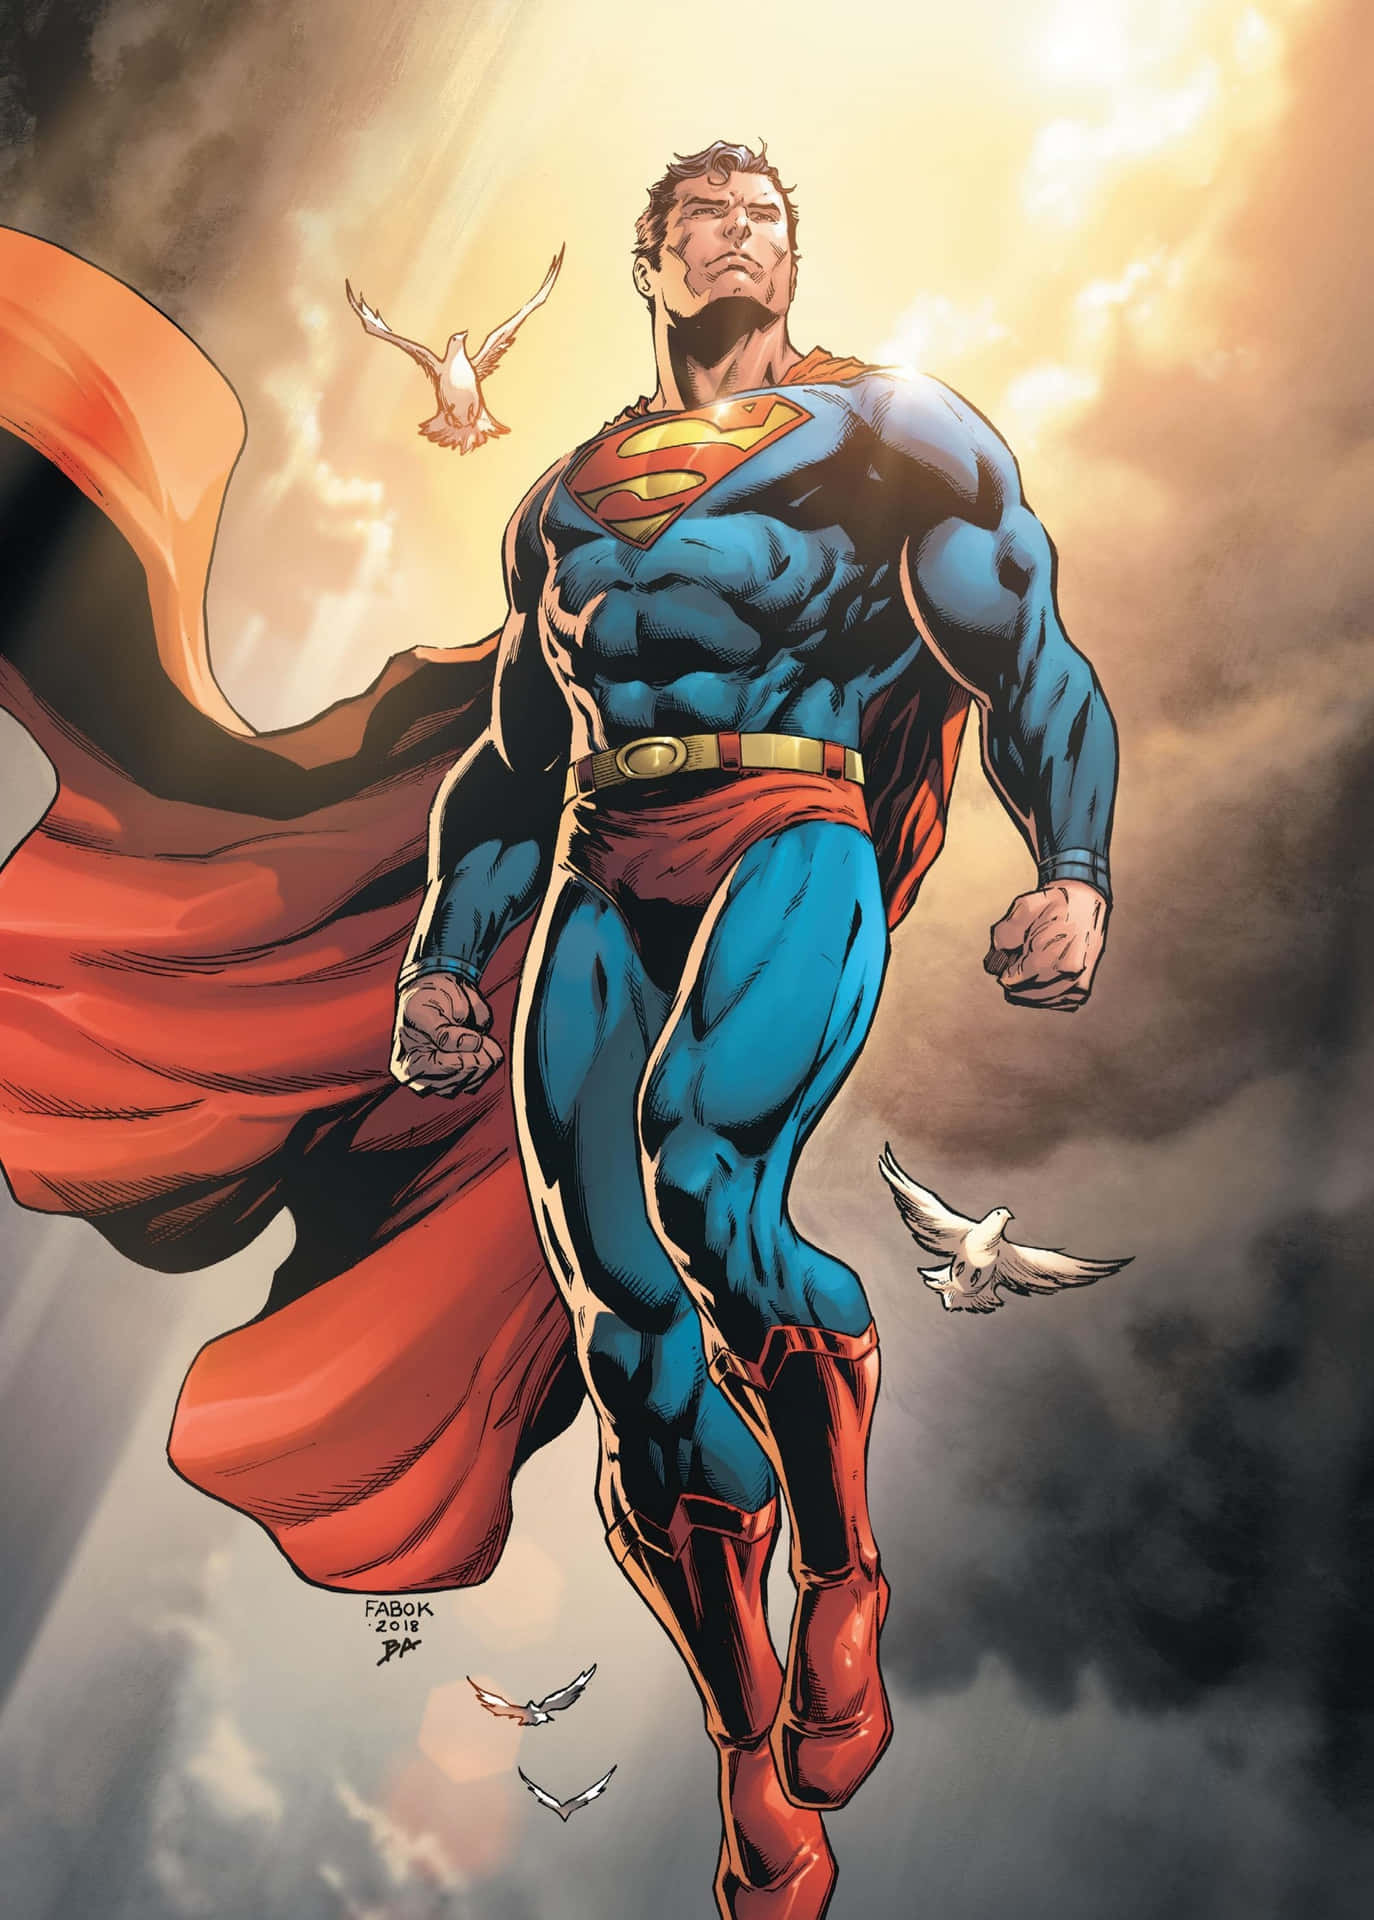 "Defender of truth, justice and the American way, Superman flies high above the city."